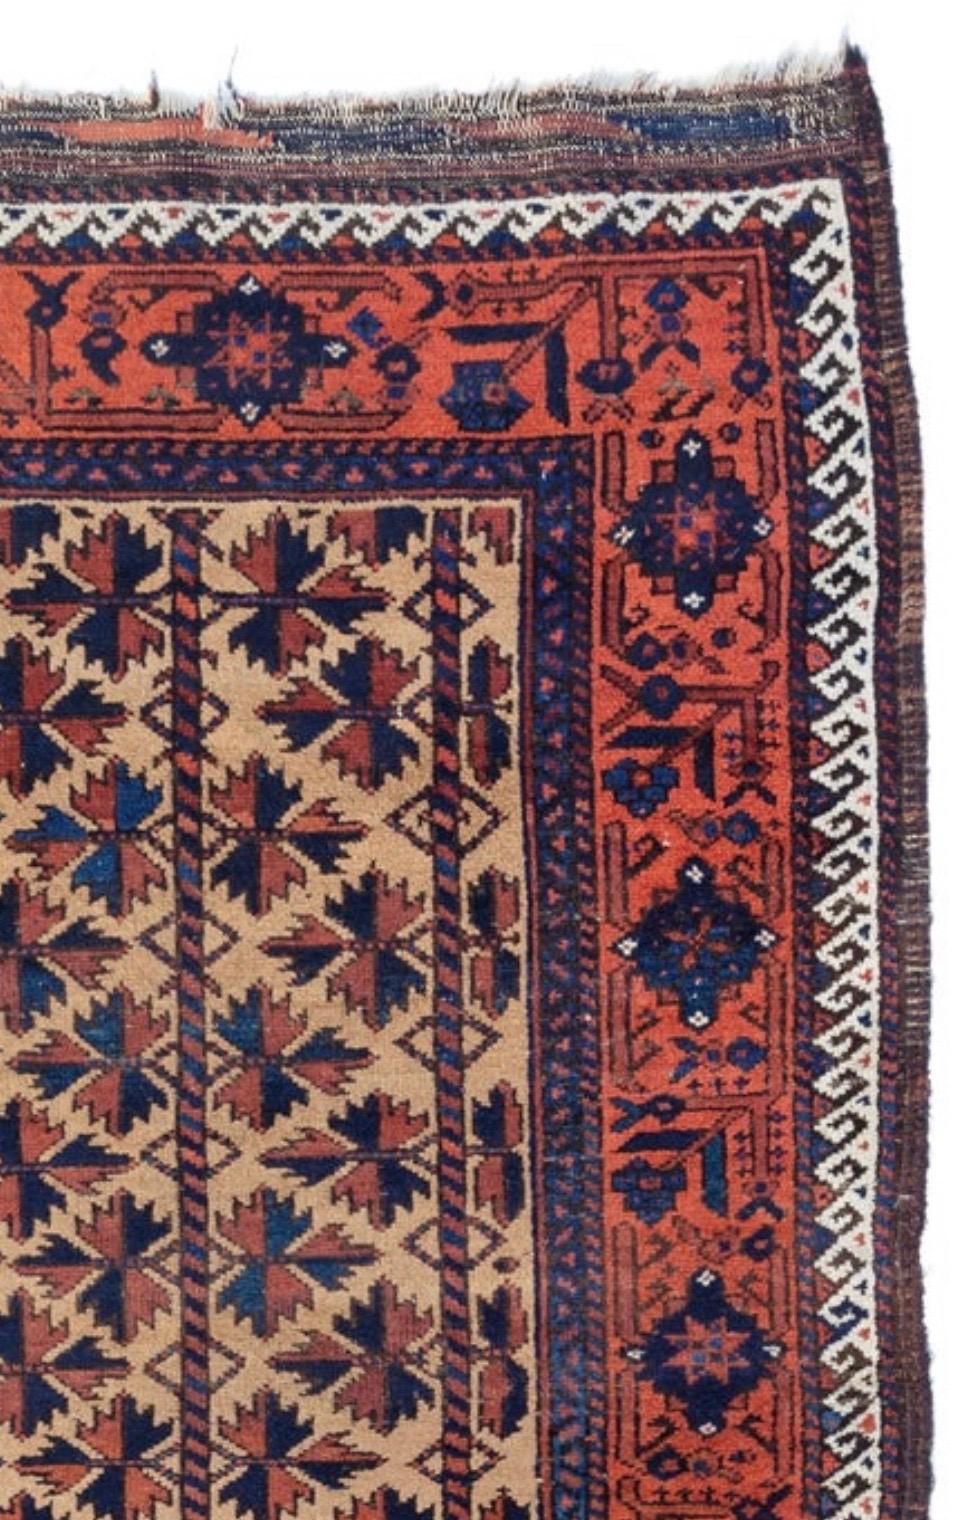 Antique Caucasian Rust Blue Ivory Geometric Tribal Baluch Rug, circa 1900s-1910s In Good Condition For Sale In New York, NY